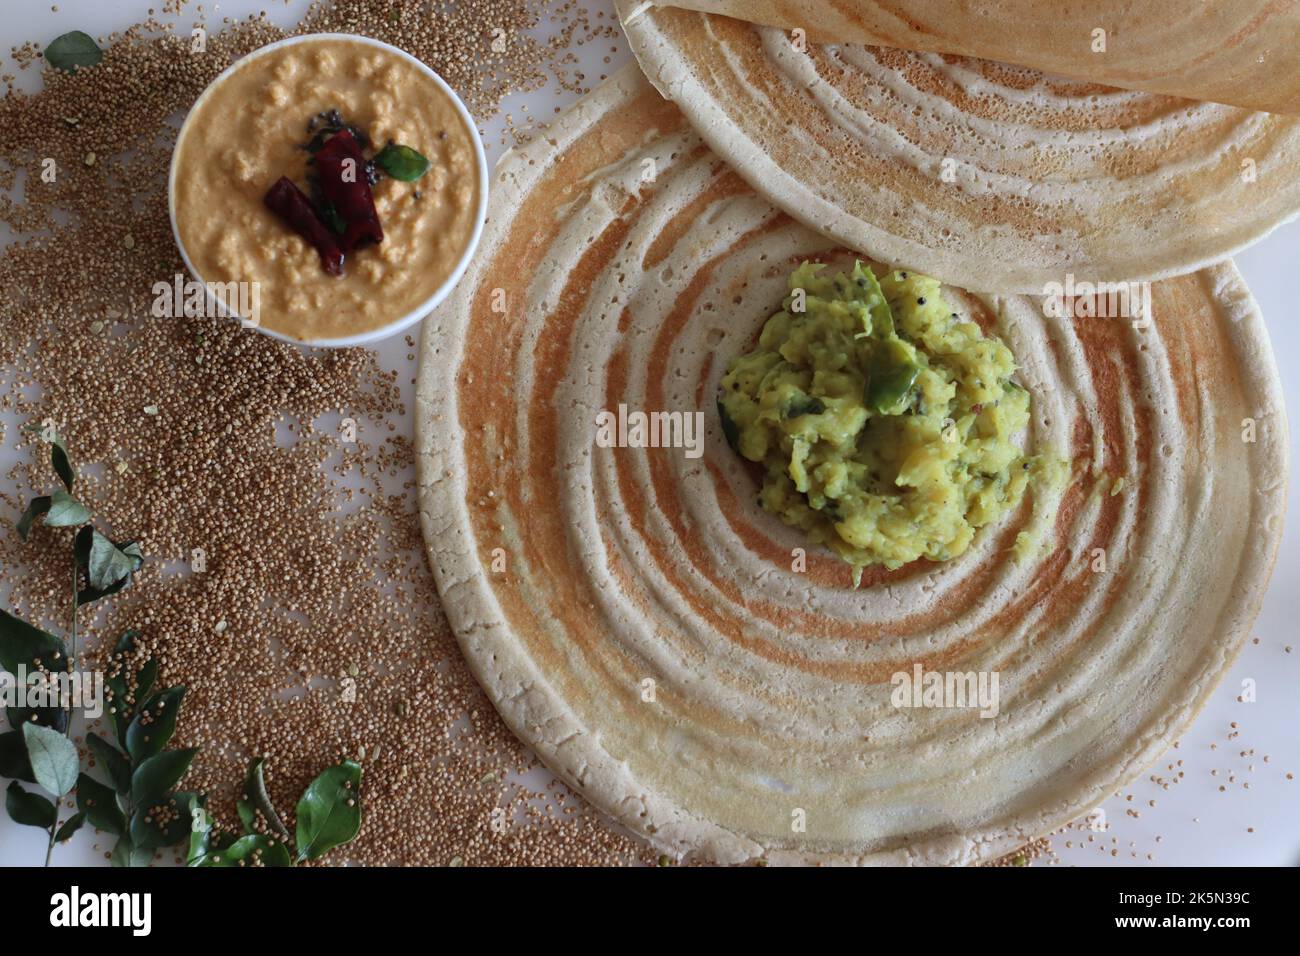 Kodo millet masala dosa. Thin crispy crepes made of kodo millet and lentils flour, stuffed with spiced mashed potatoes. Shot on white background. Stock Photo